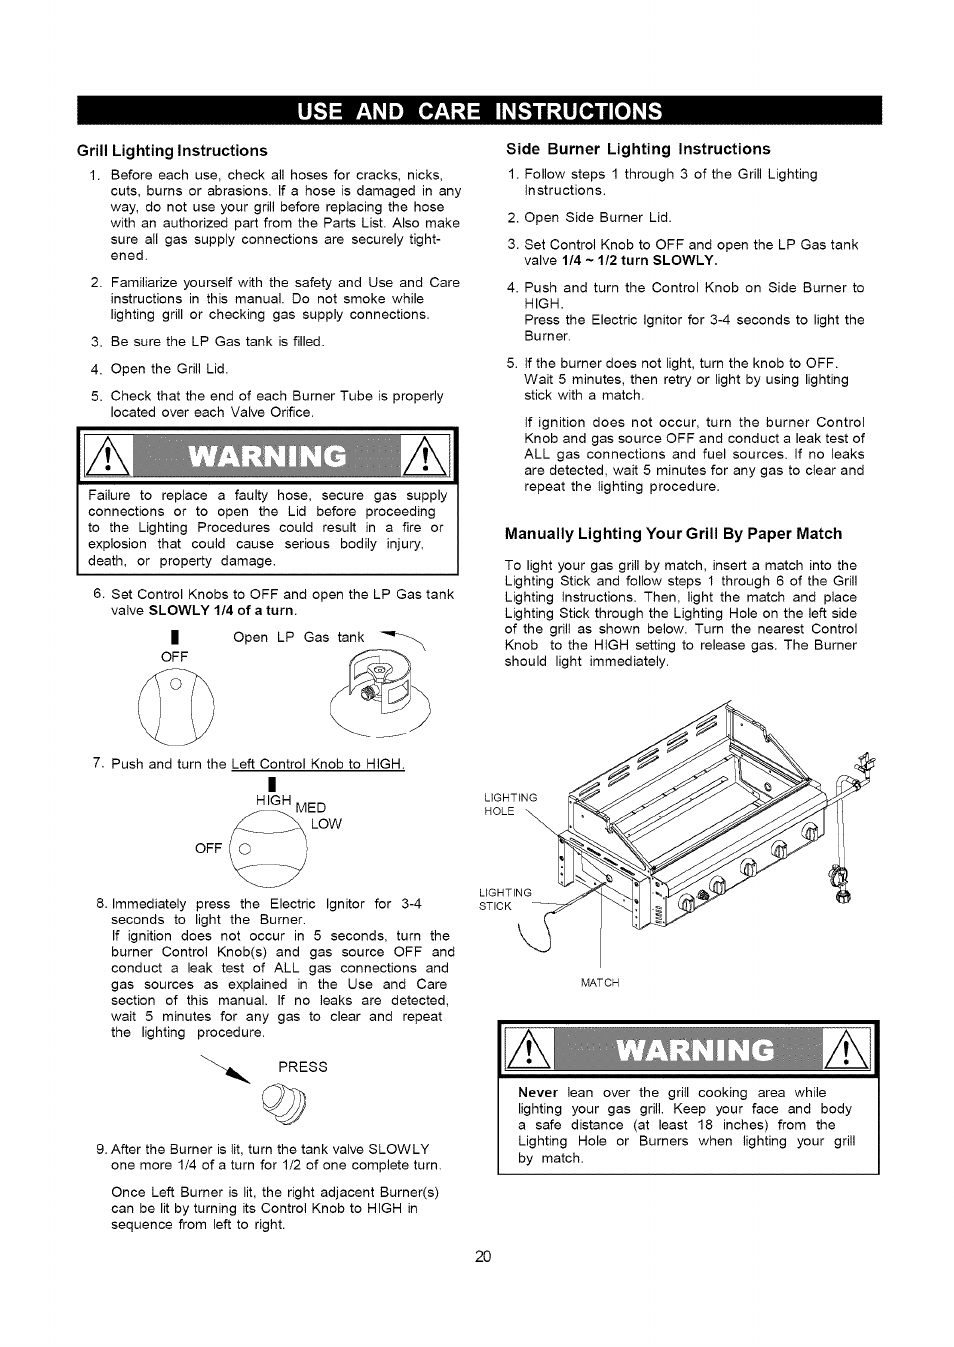 Grill lighting instructions, Side burner lighting instructions, Manually lighting your grill by paper match | Warning, Use and care instructions | Kenmore 141.16322 User Manual | Page 20 / 28